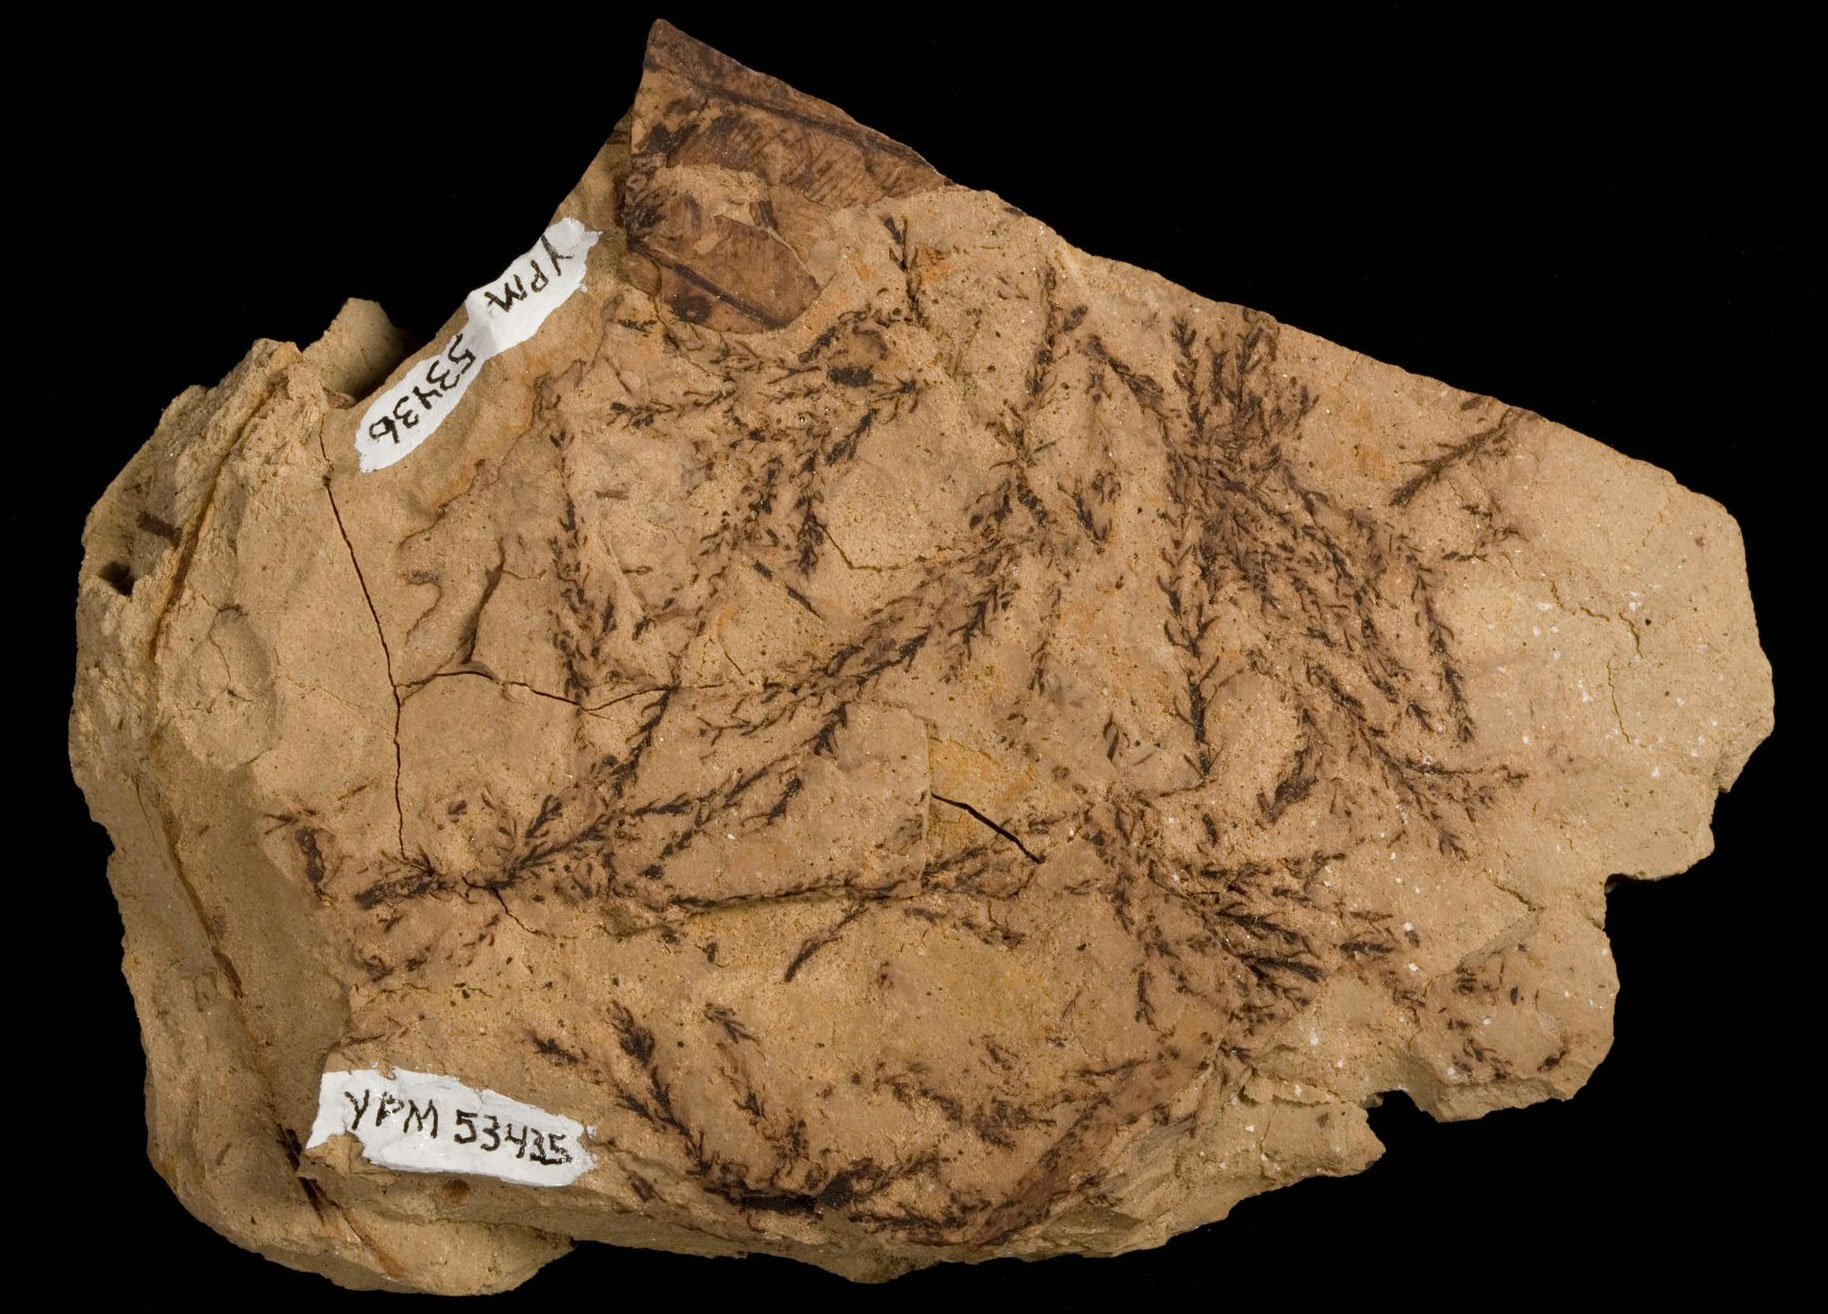 Photograph of fossil Chinese swamp cypress (Glytostrobus europaeus) branchlets with leaves. The photo shows a beige rock with randomly arranged branchlets on its surface. The branchlets have short scale or needle leaves. The branchlets and leaves are dark brown.